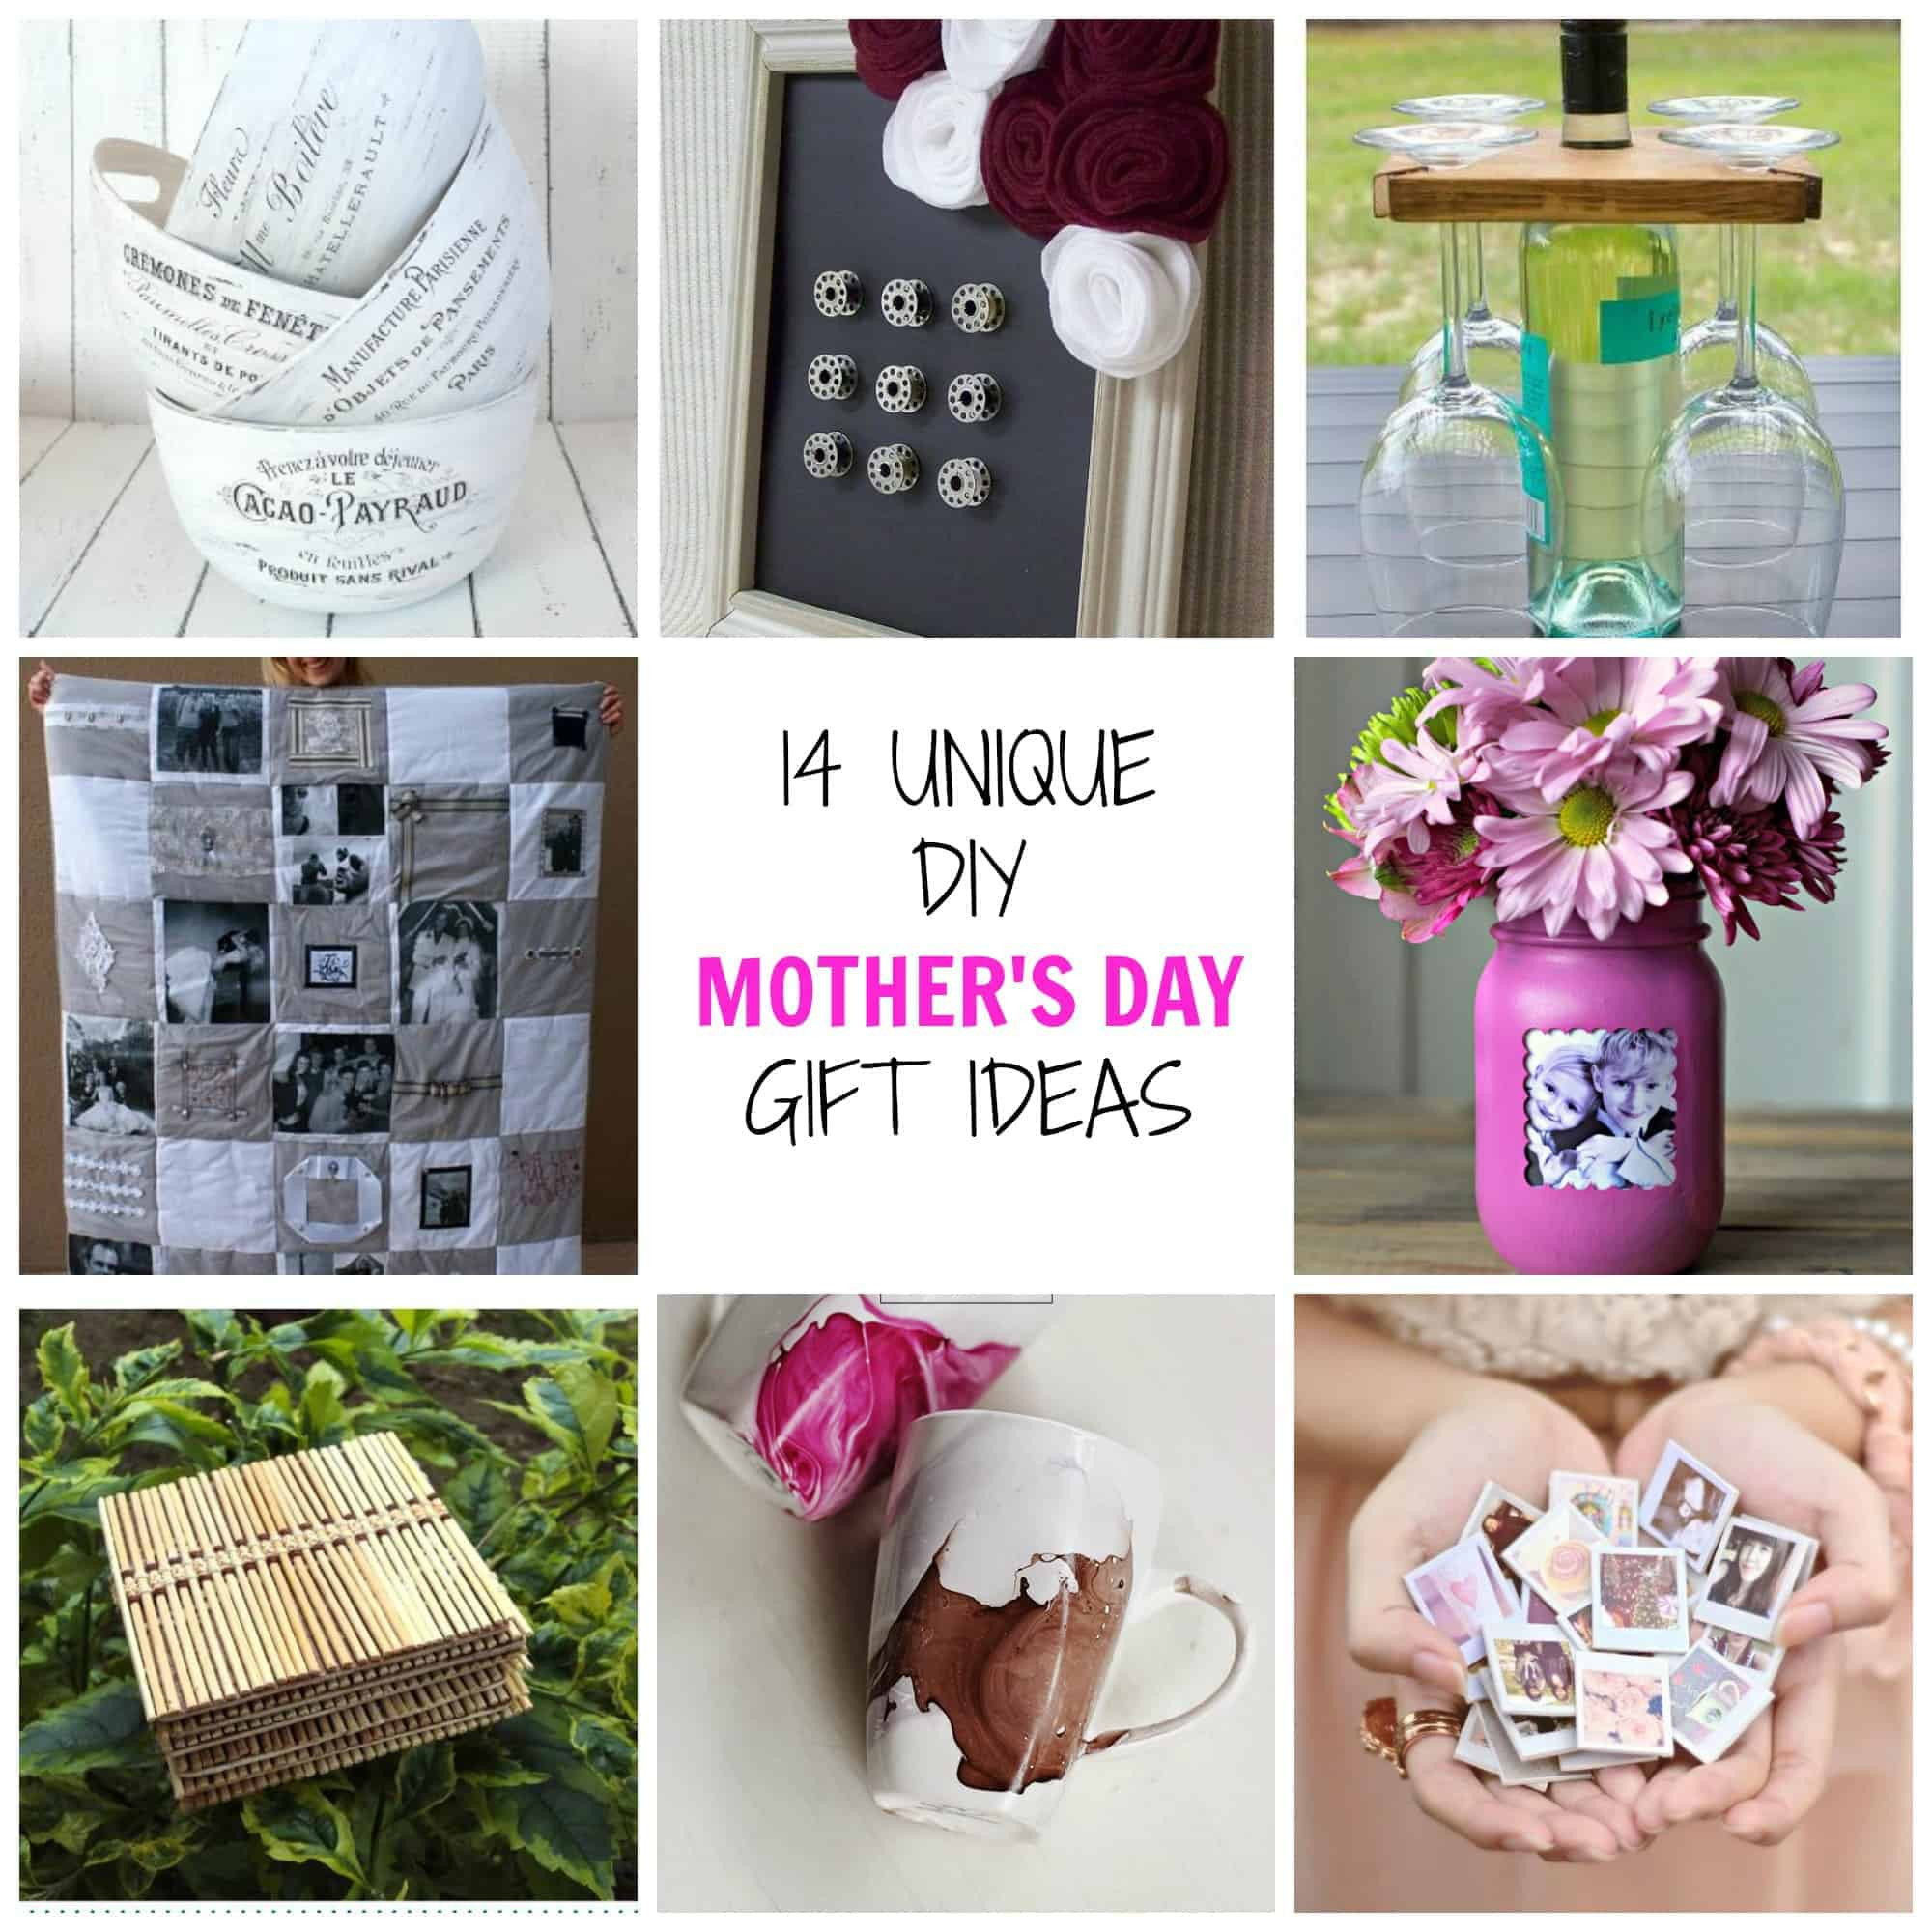 Mothers Da Gift Ideas
 14 Unique DIY Mother s Day Gifts Simplify Create Inspire